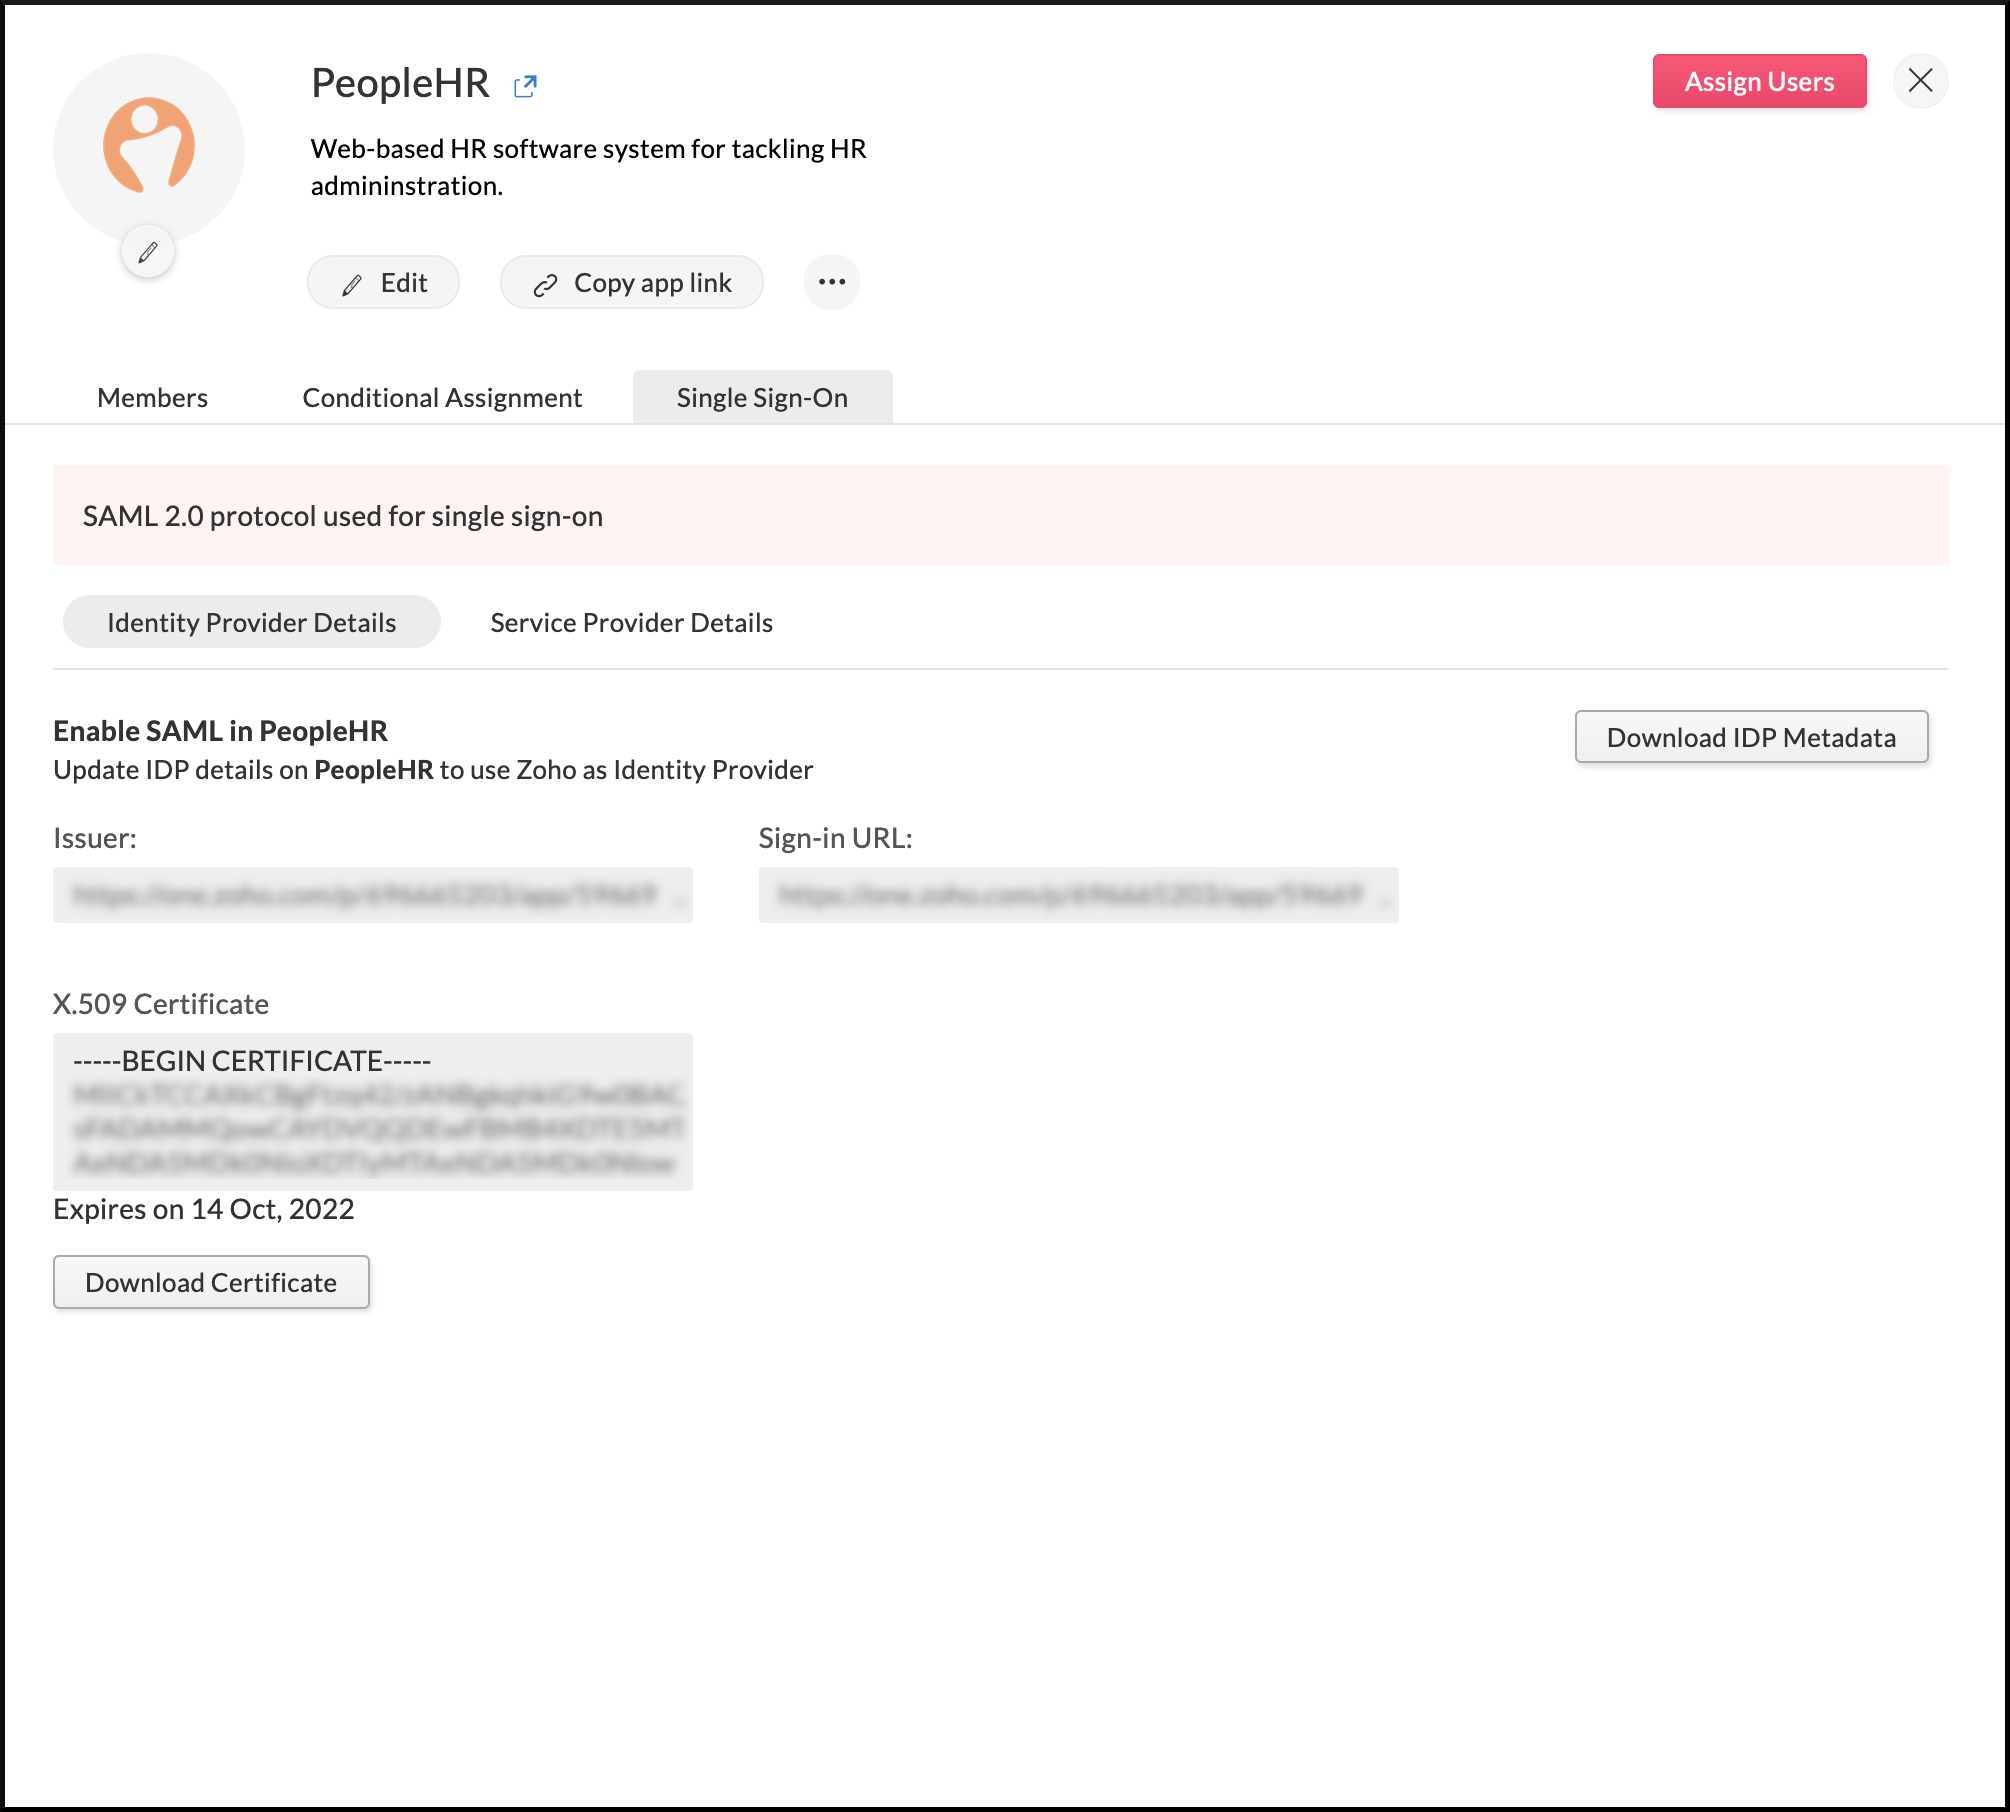 Identity provider details needed to configure SAML in PeopleHR